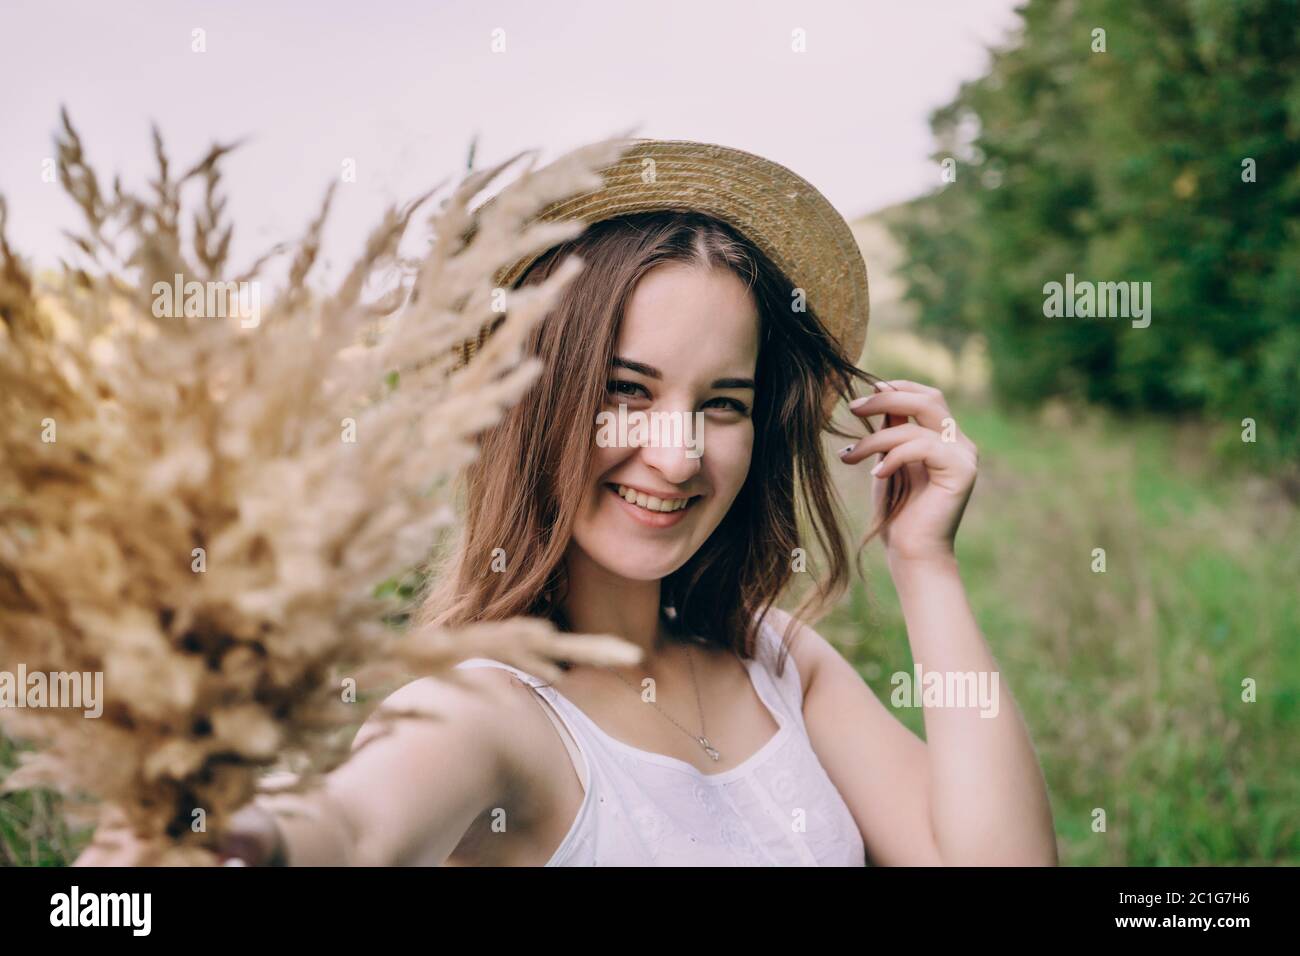 Happy young woman in a white dress in a straw hat. Smiling girl with a bouquet of dried flowers. Girl walks in a green park on a spring day Stock Photo